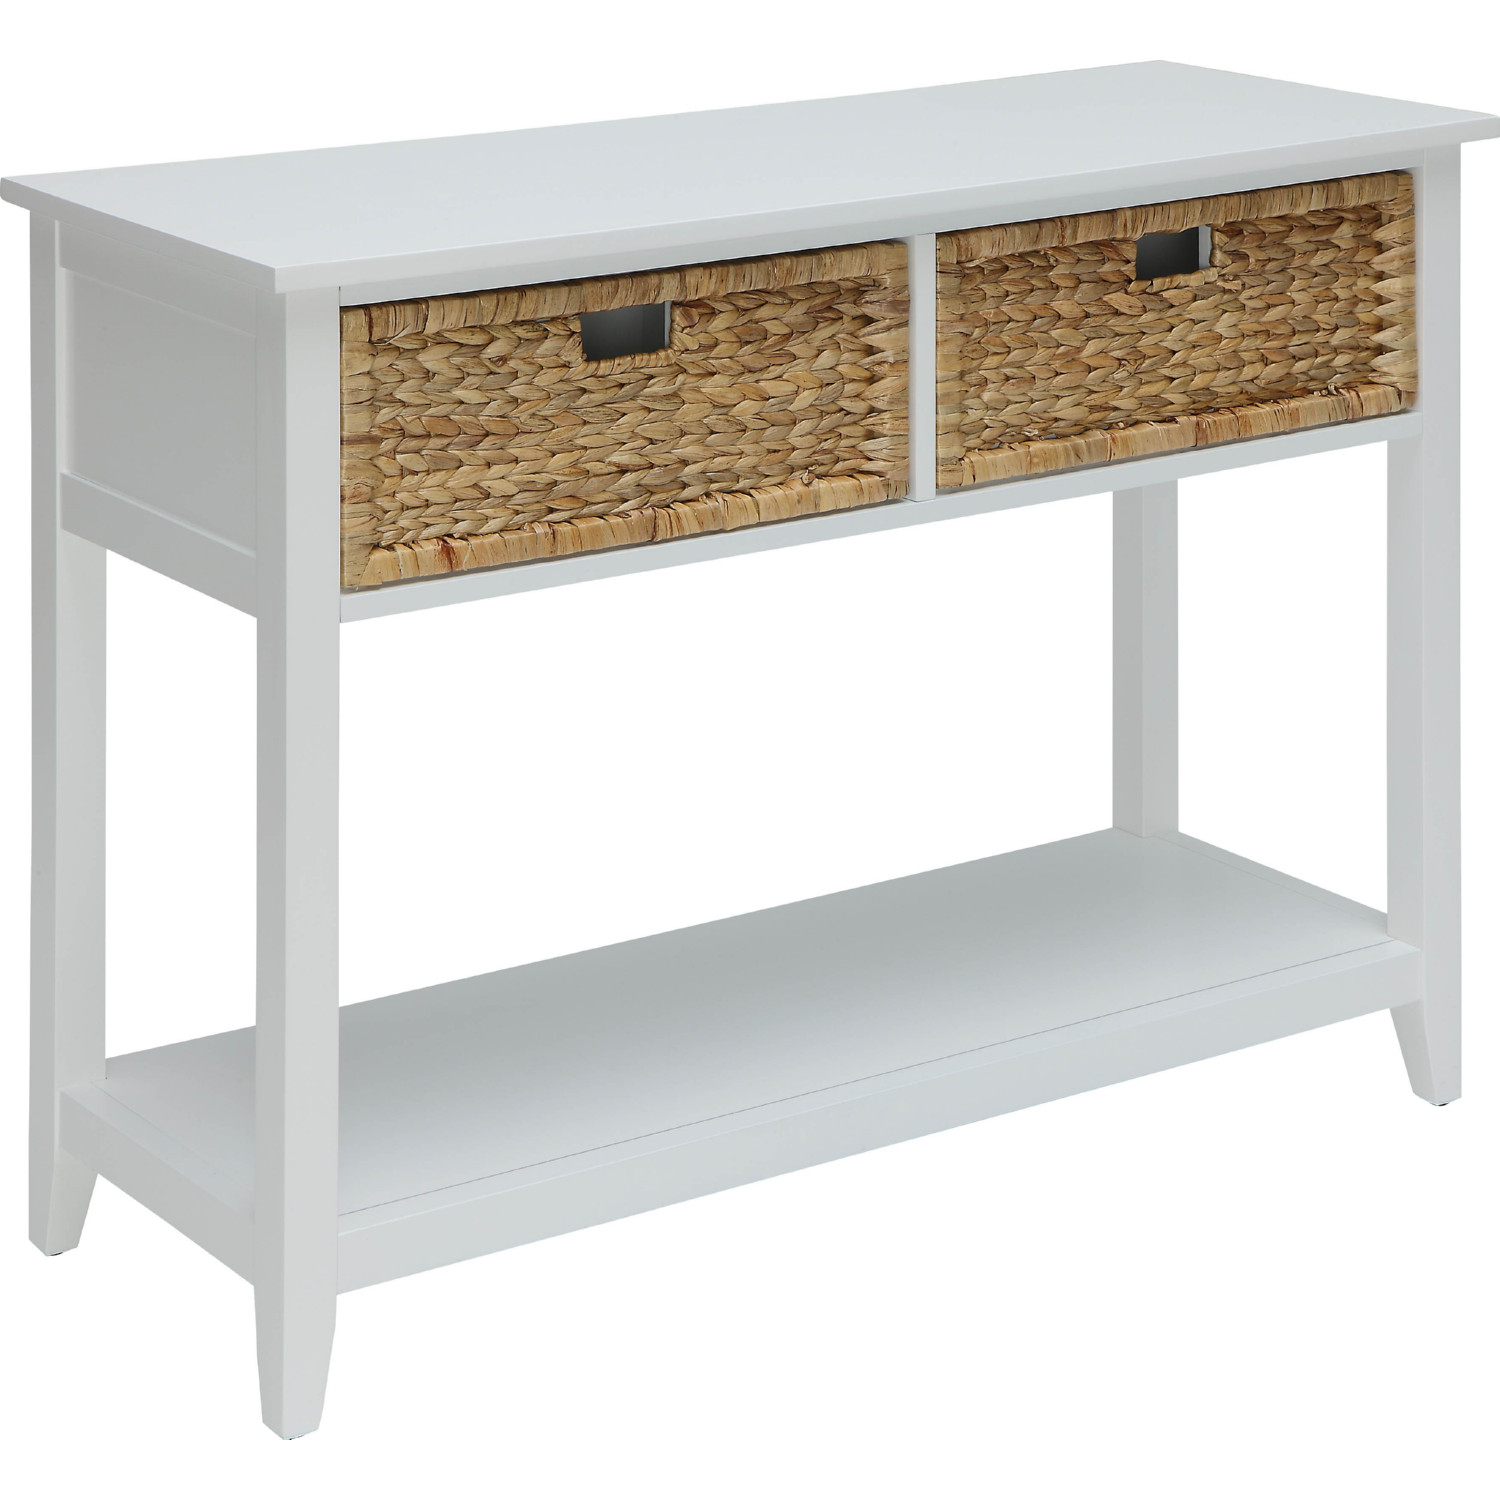 Acme 90262 Flavius Console Table w/ 2 Drawers in White w/ Baskets